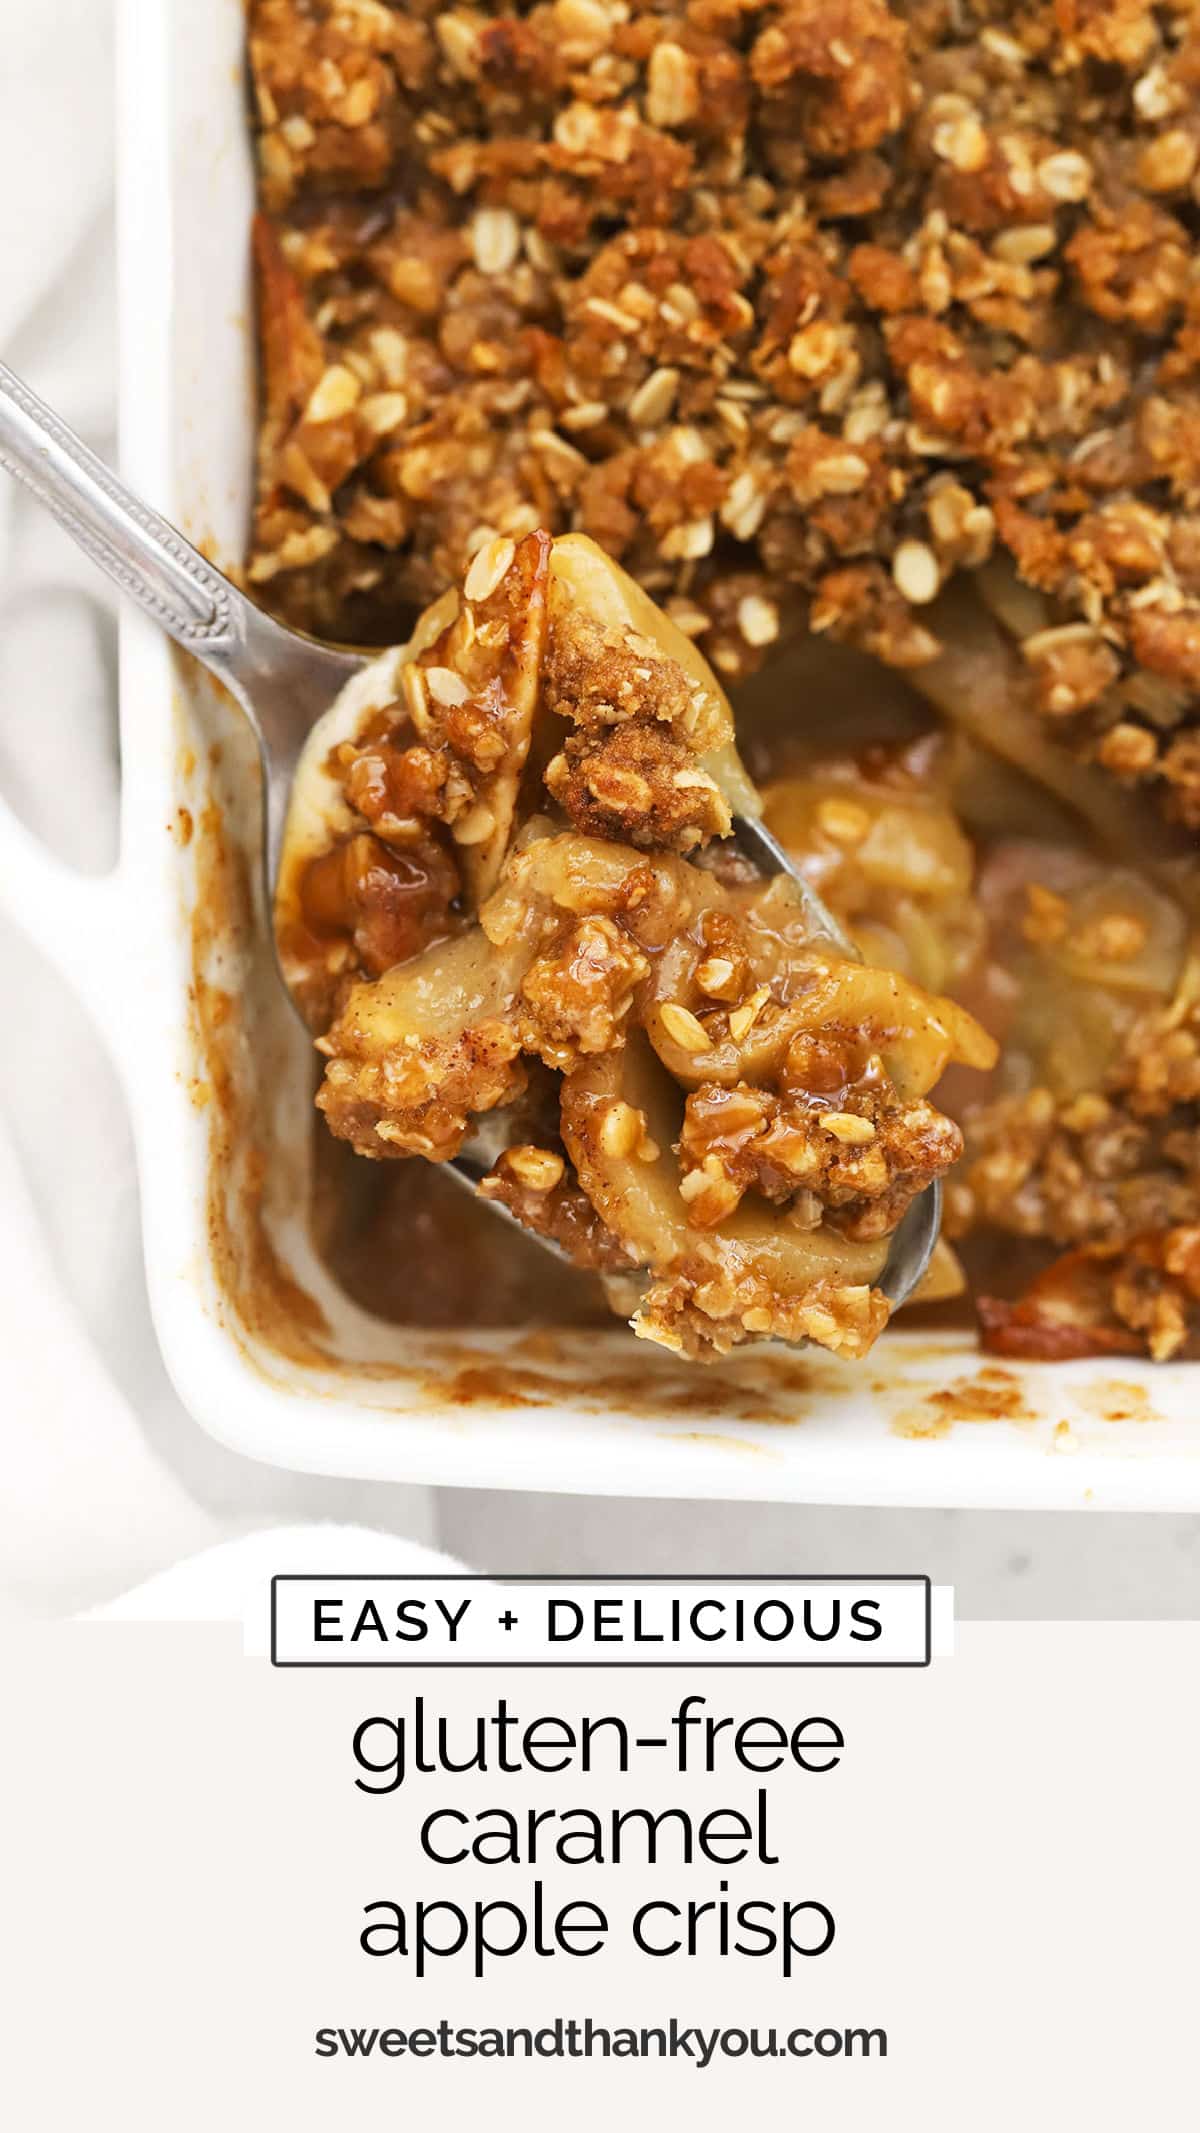 This Gluten-Free Caramel Apple Crisp recipe is the perfect fall dessert, made with sweet apples, crispy oat crumble & gooey caramel! / gluten free apple crisp with caramel sauce / salted caramel apple crisp / apple crisp with caramel sauce / gluten free apple crisp recipe / easy gluten free apple crisp / gluten free apple dessert / gluten free thanksgiving dessert / gluten free fruit crisp / 